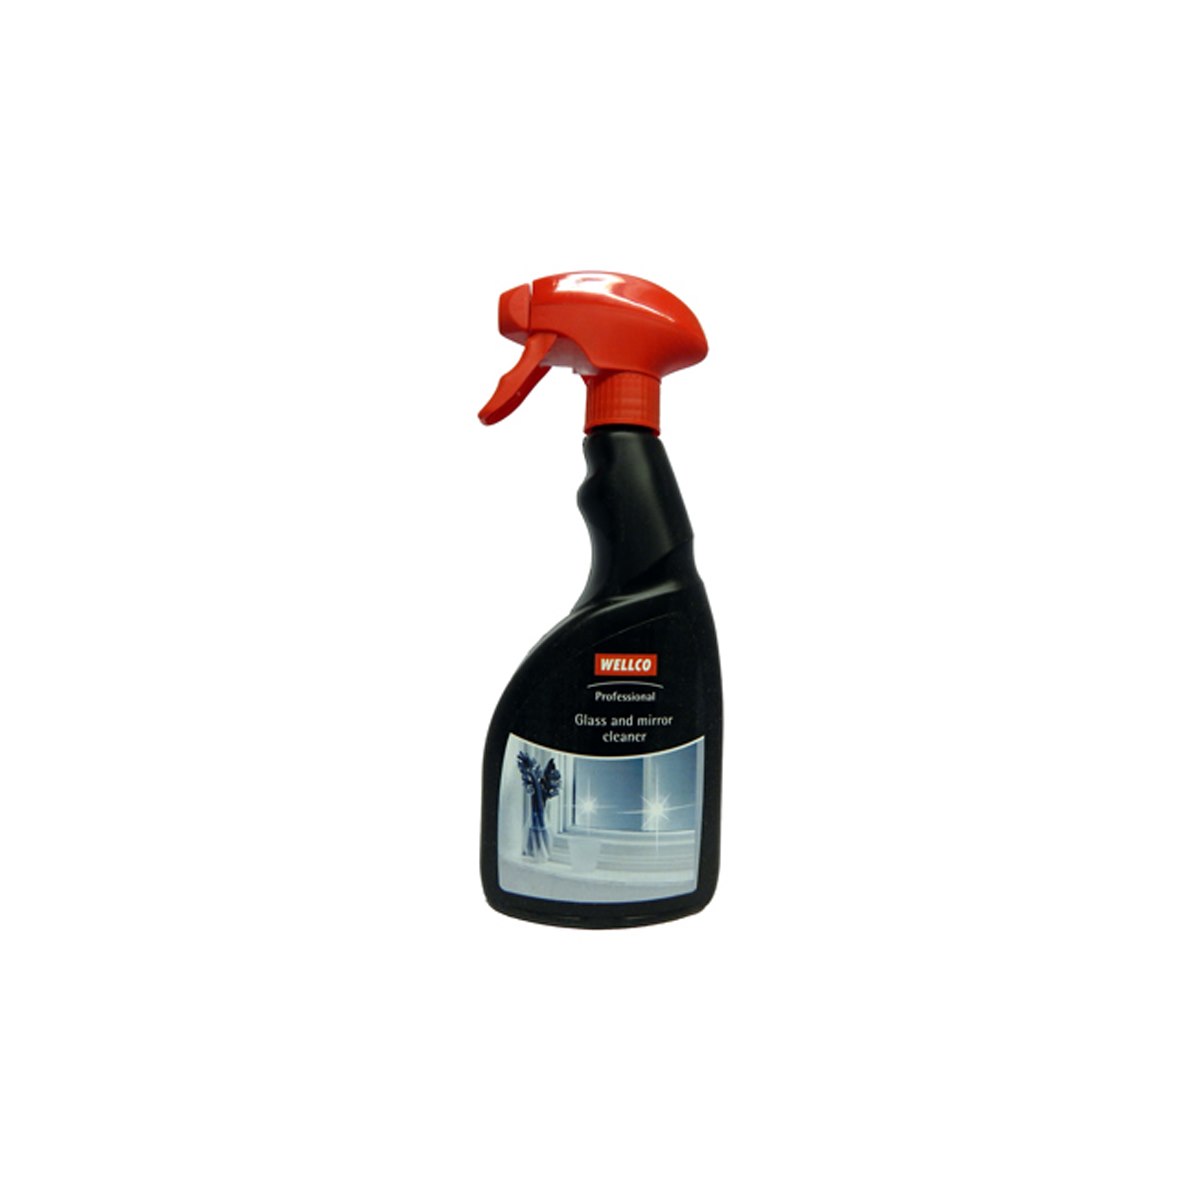 Wellco Professional Glass And Mirror Cleaner Spray 500ml